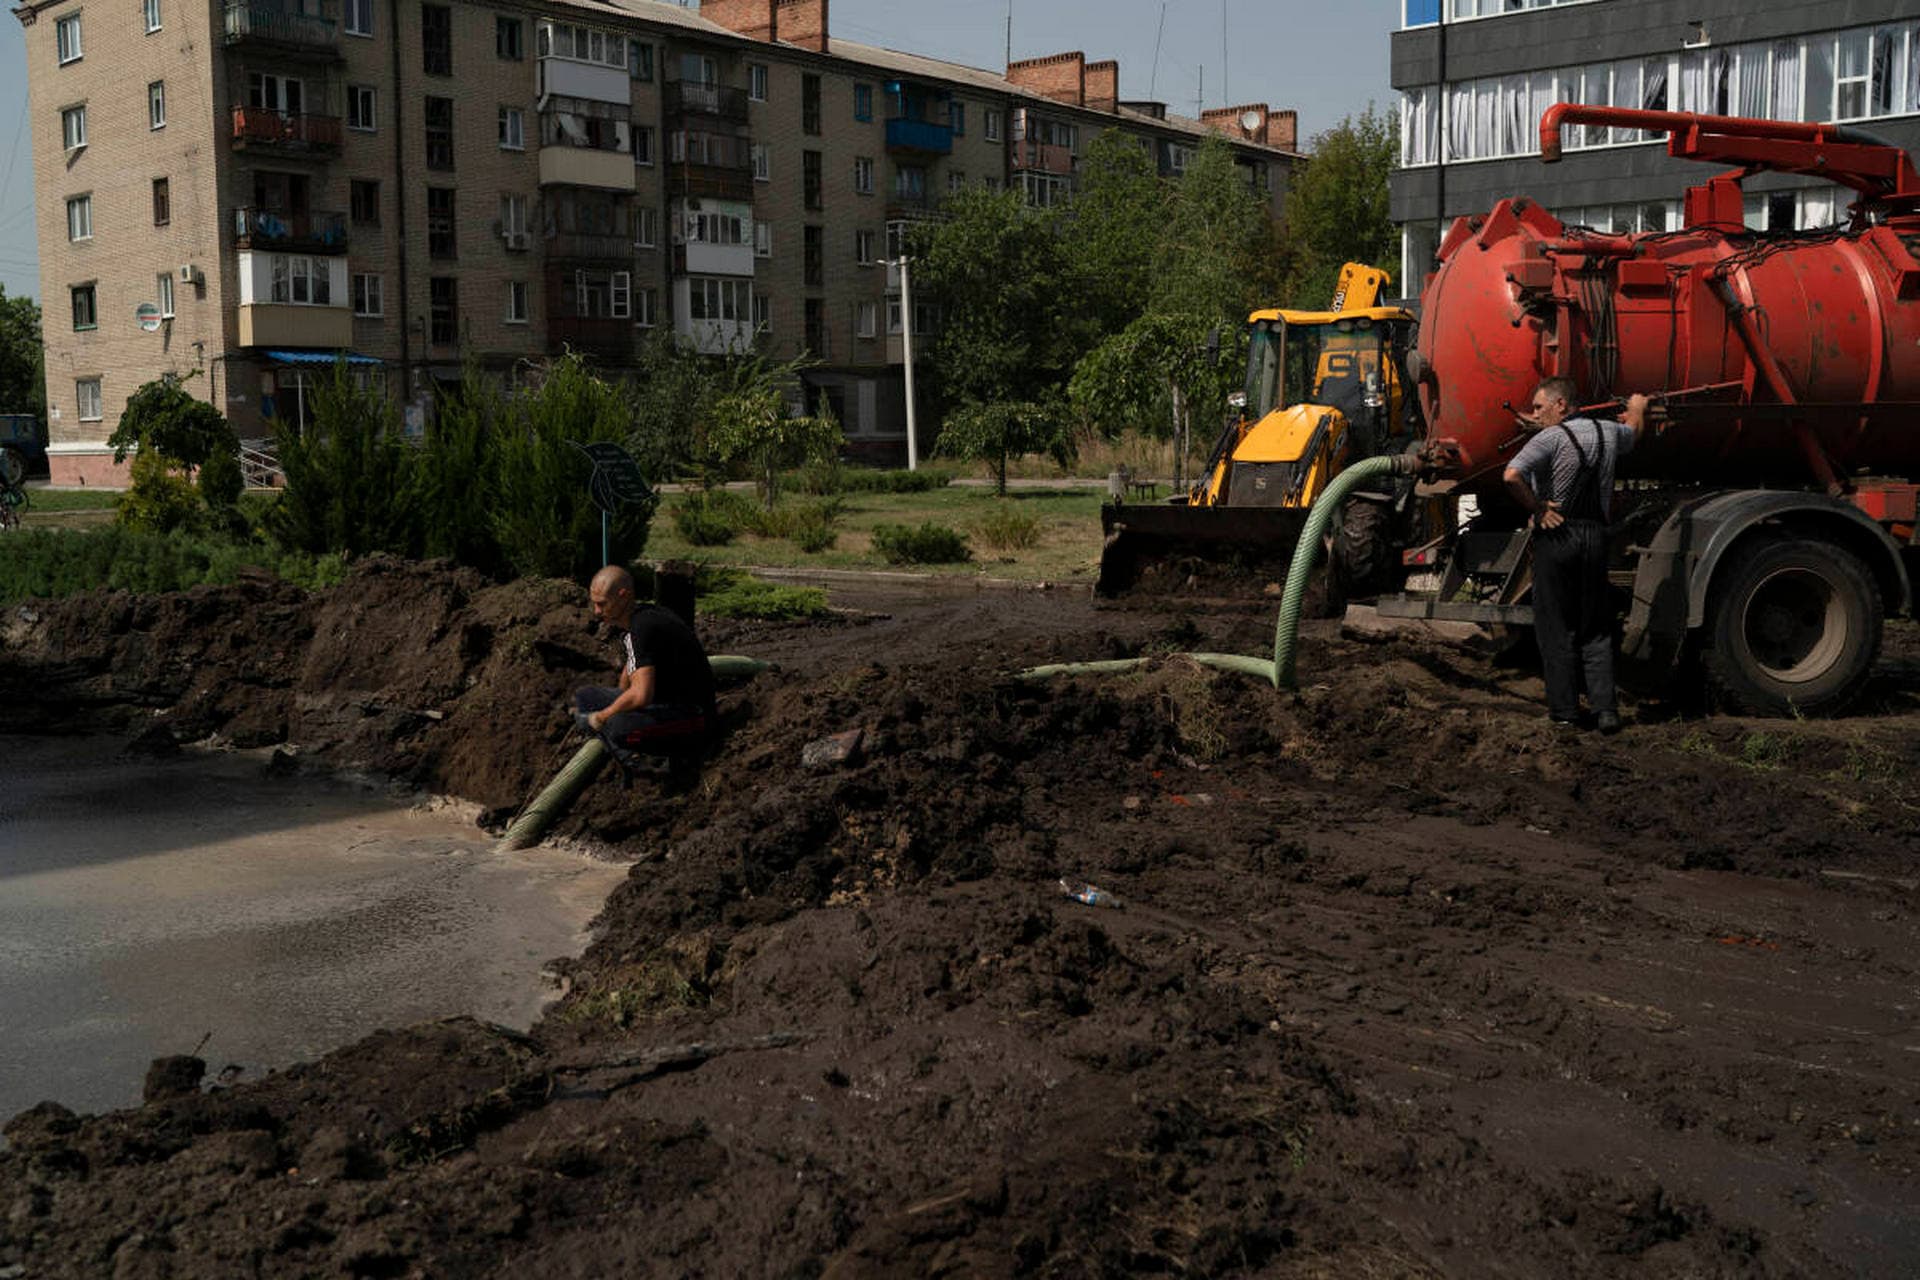 Workers drain water from a crater created by an explosion that damaged a residential building after a Russian attack in Slovyansk